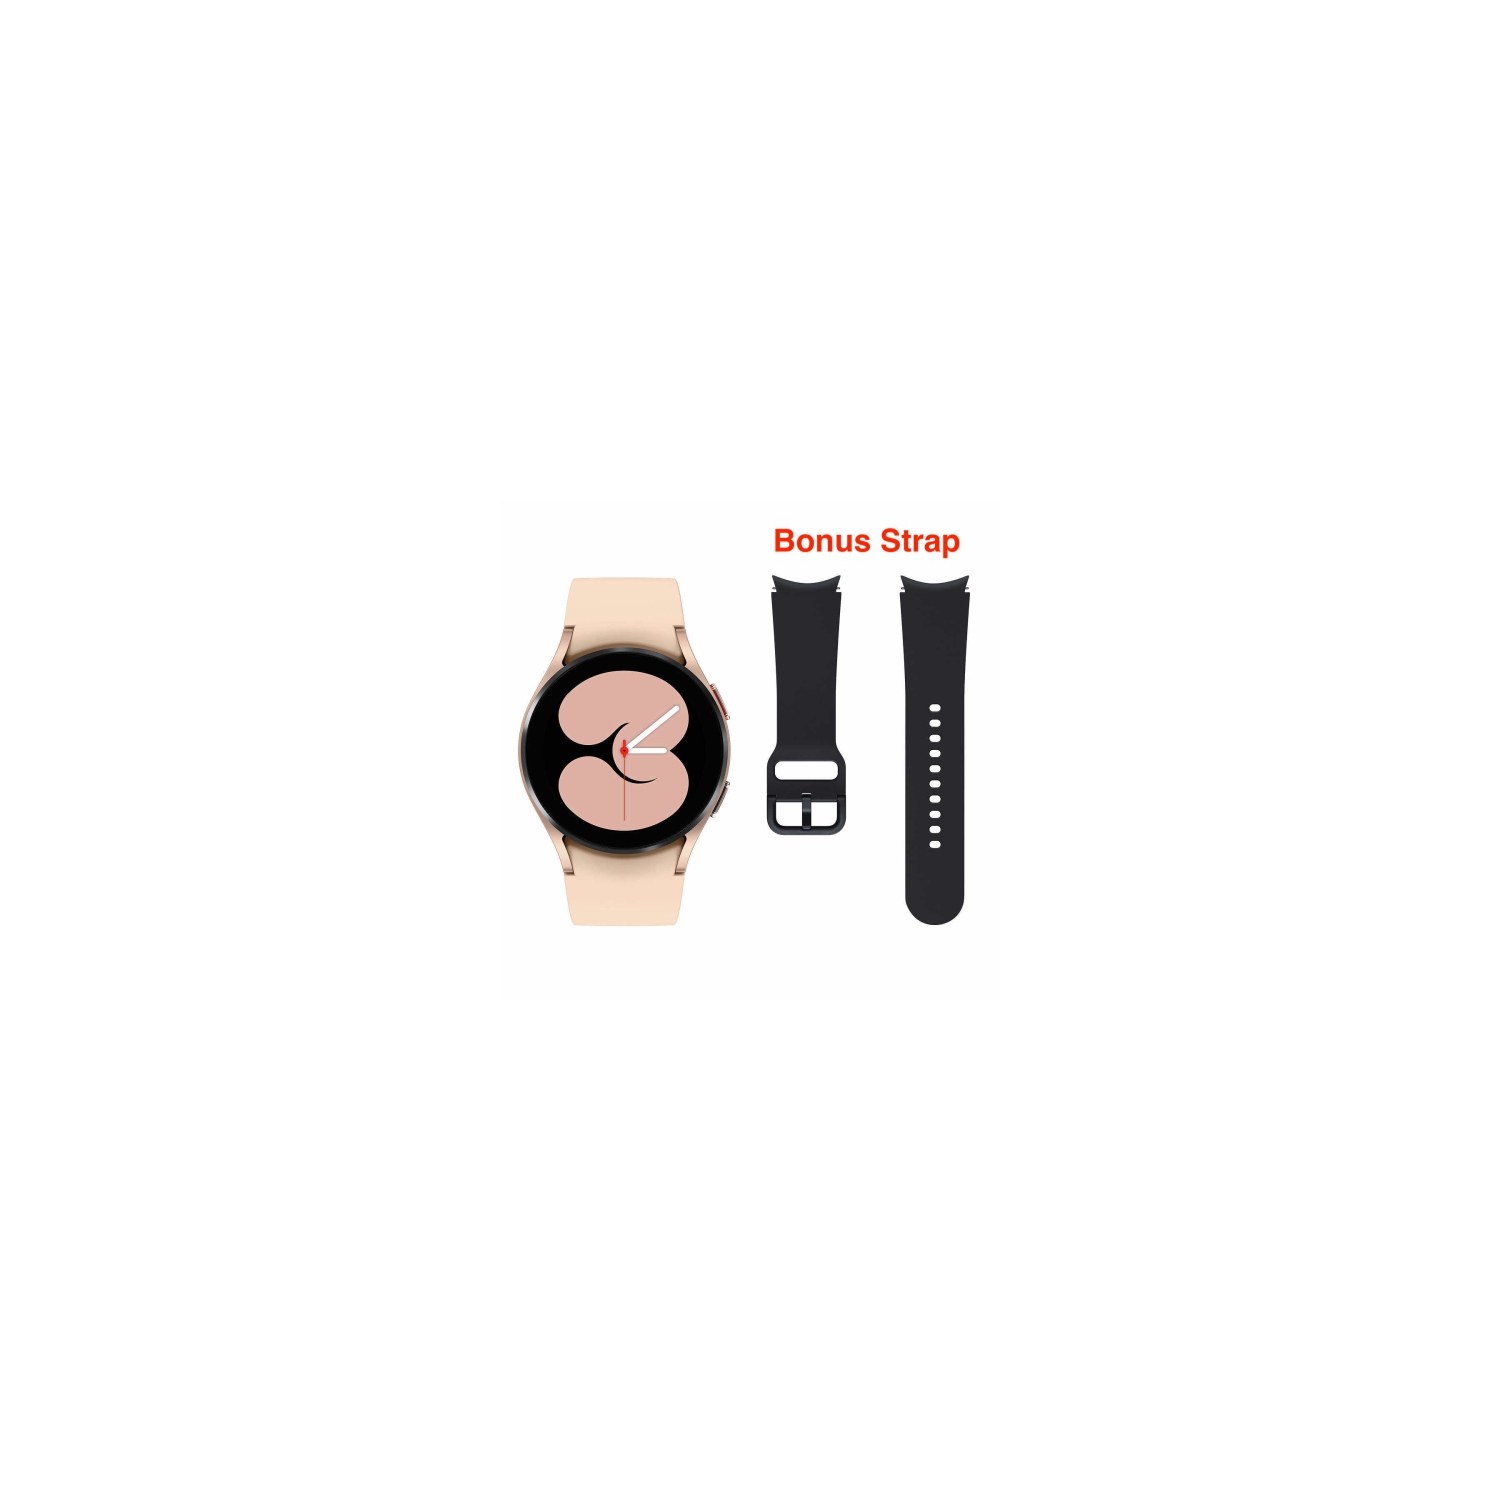 Refurbished (Fair) - Samsung Galaxy Watch 4 40mm Smartwatch with Heart Rate Monitor ( Includes additional strap in black ) - Pink Gold